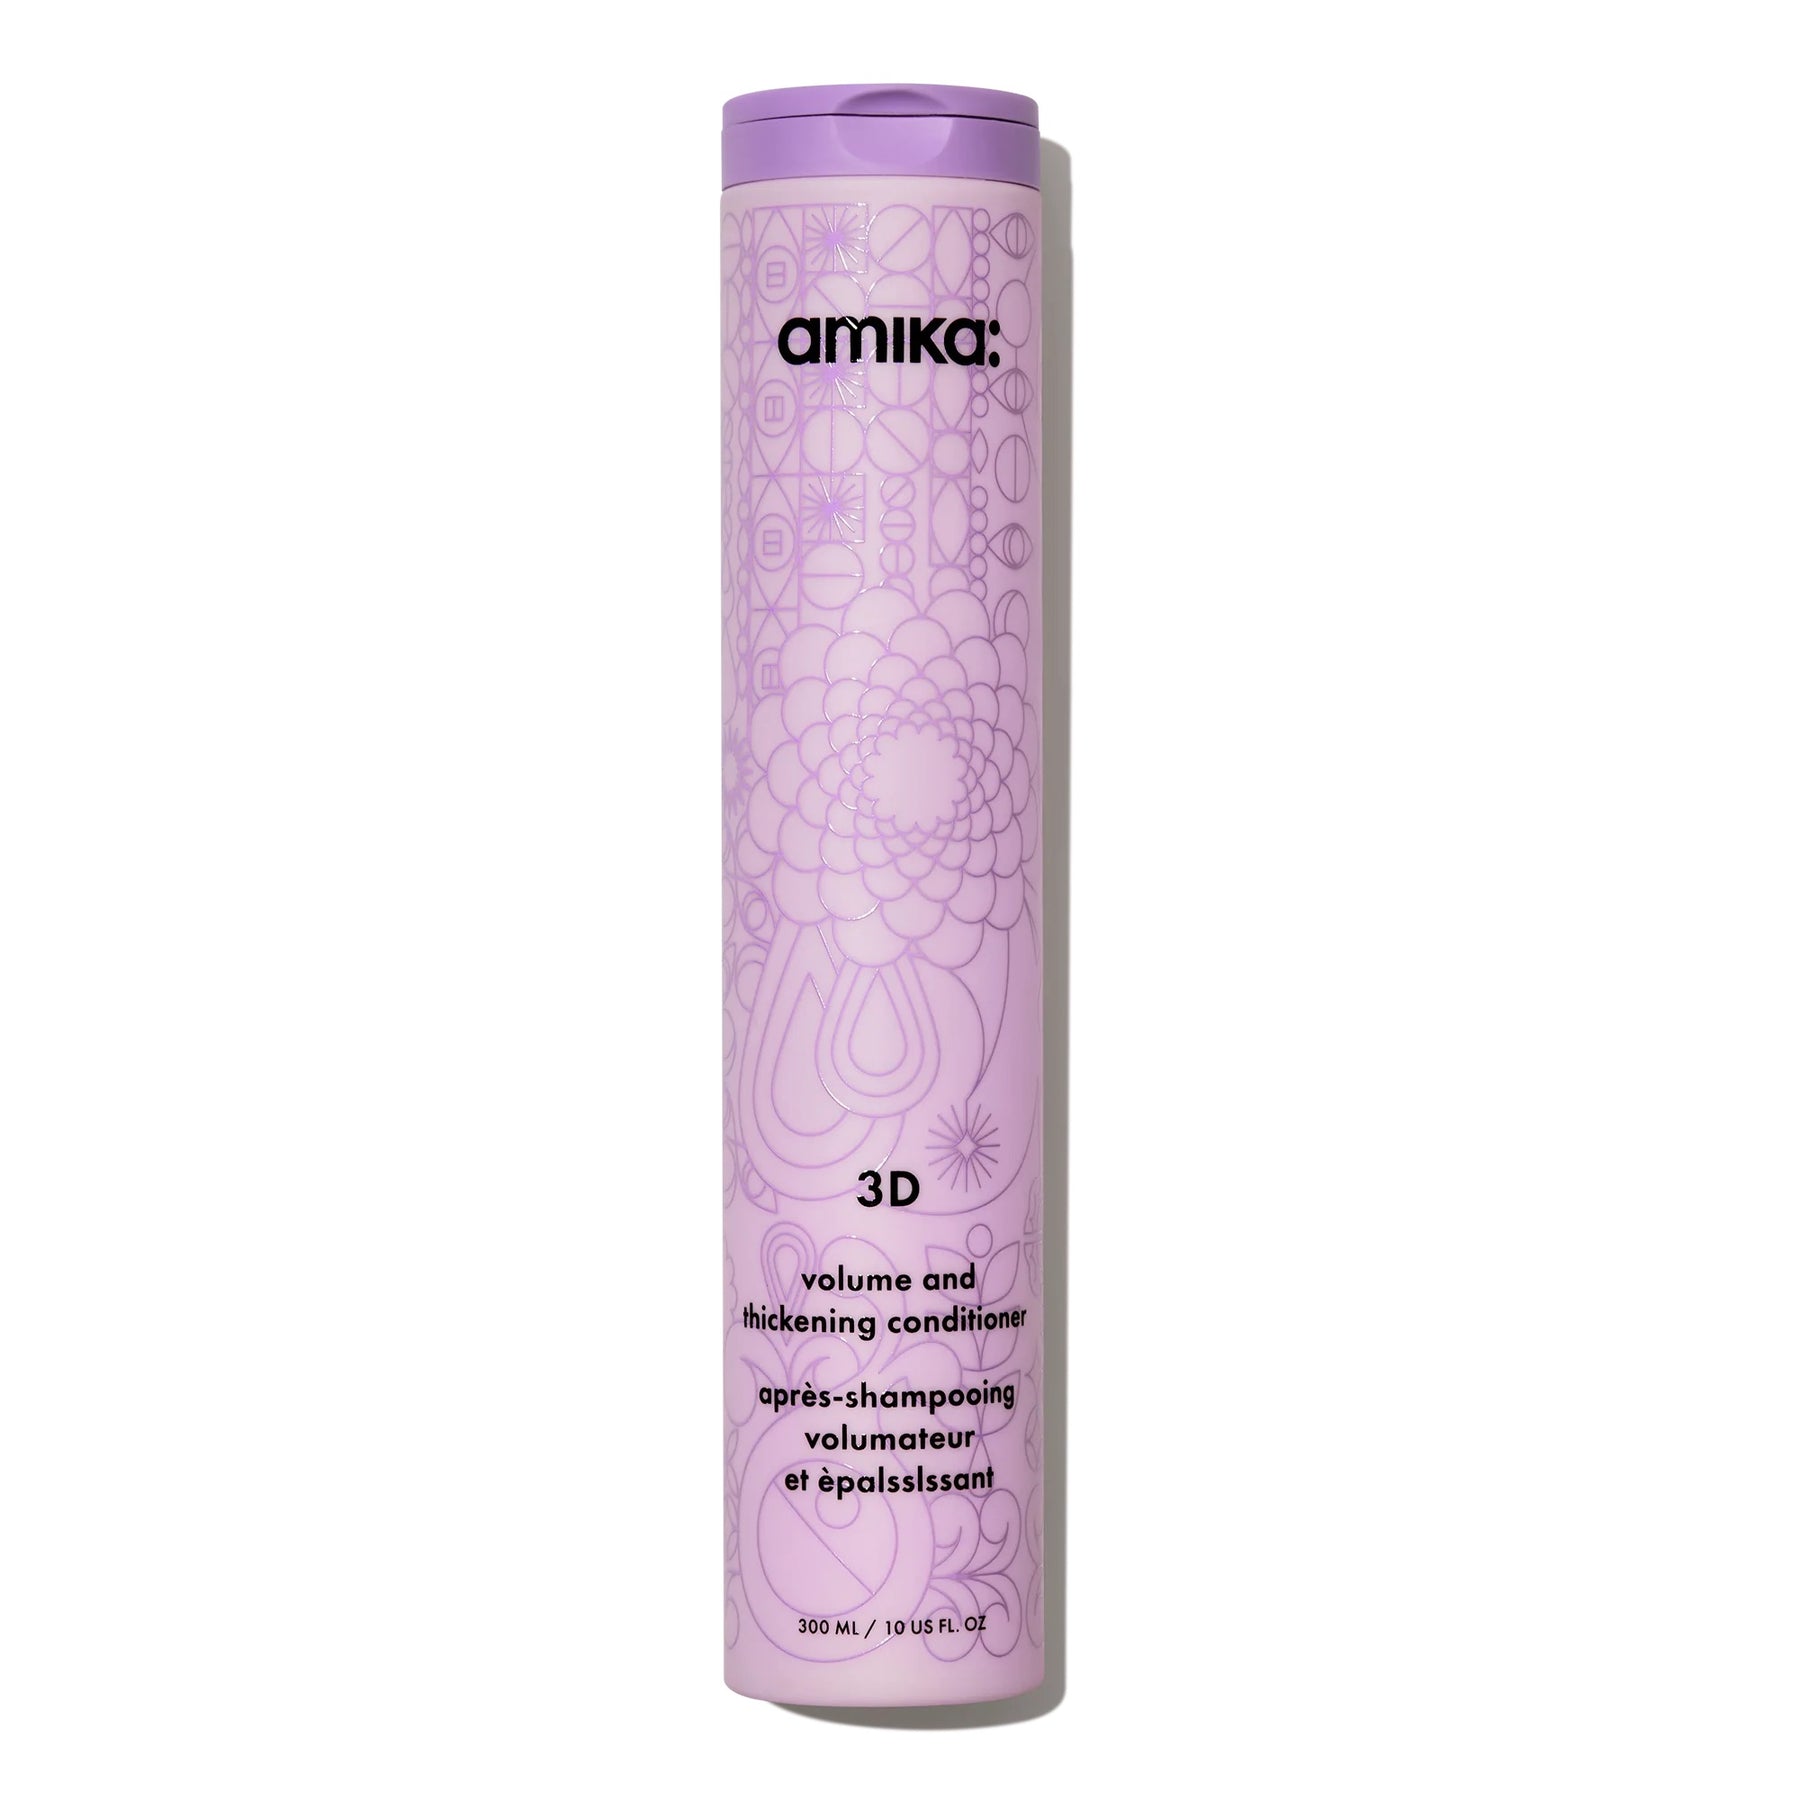 Amika 3D Volume and Thickening Conditioner